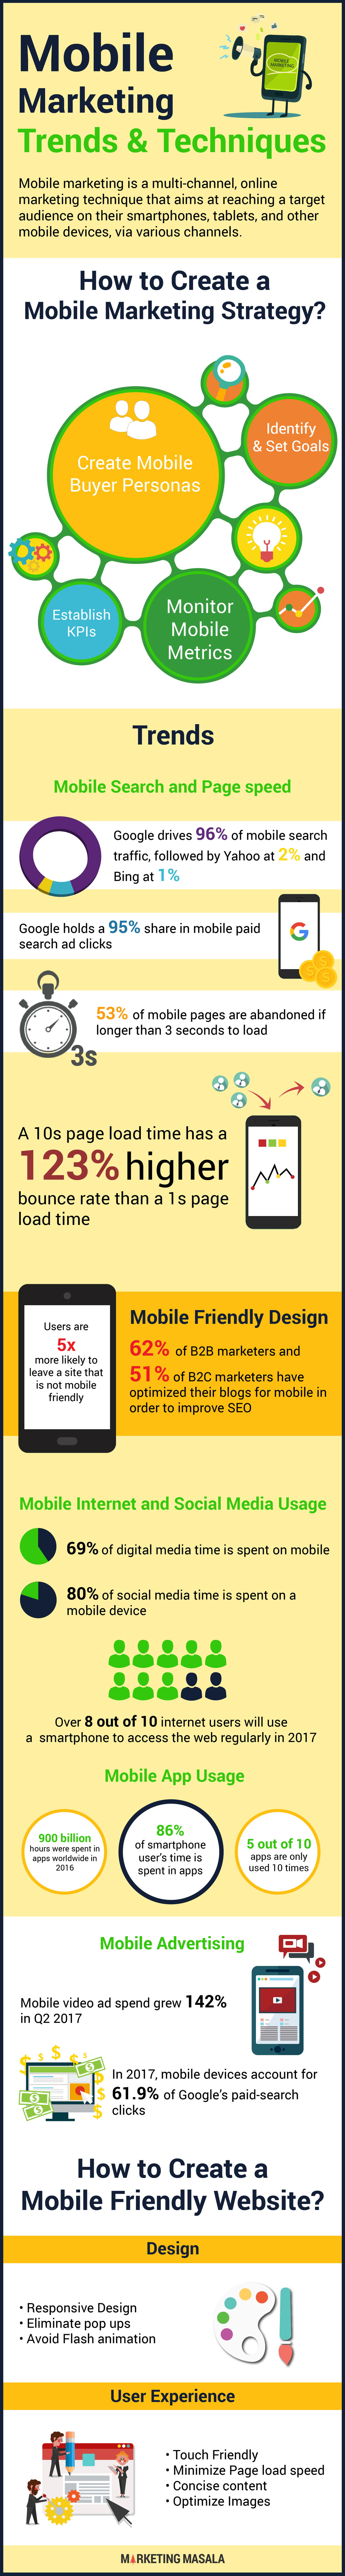 mobile marketing trends infographic